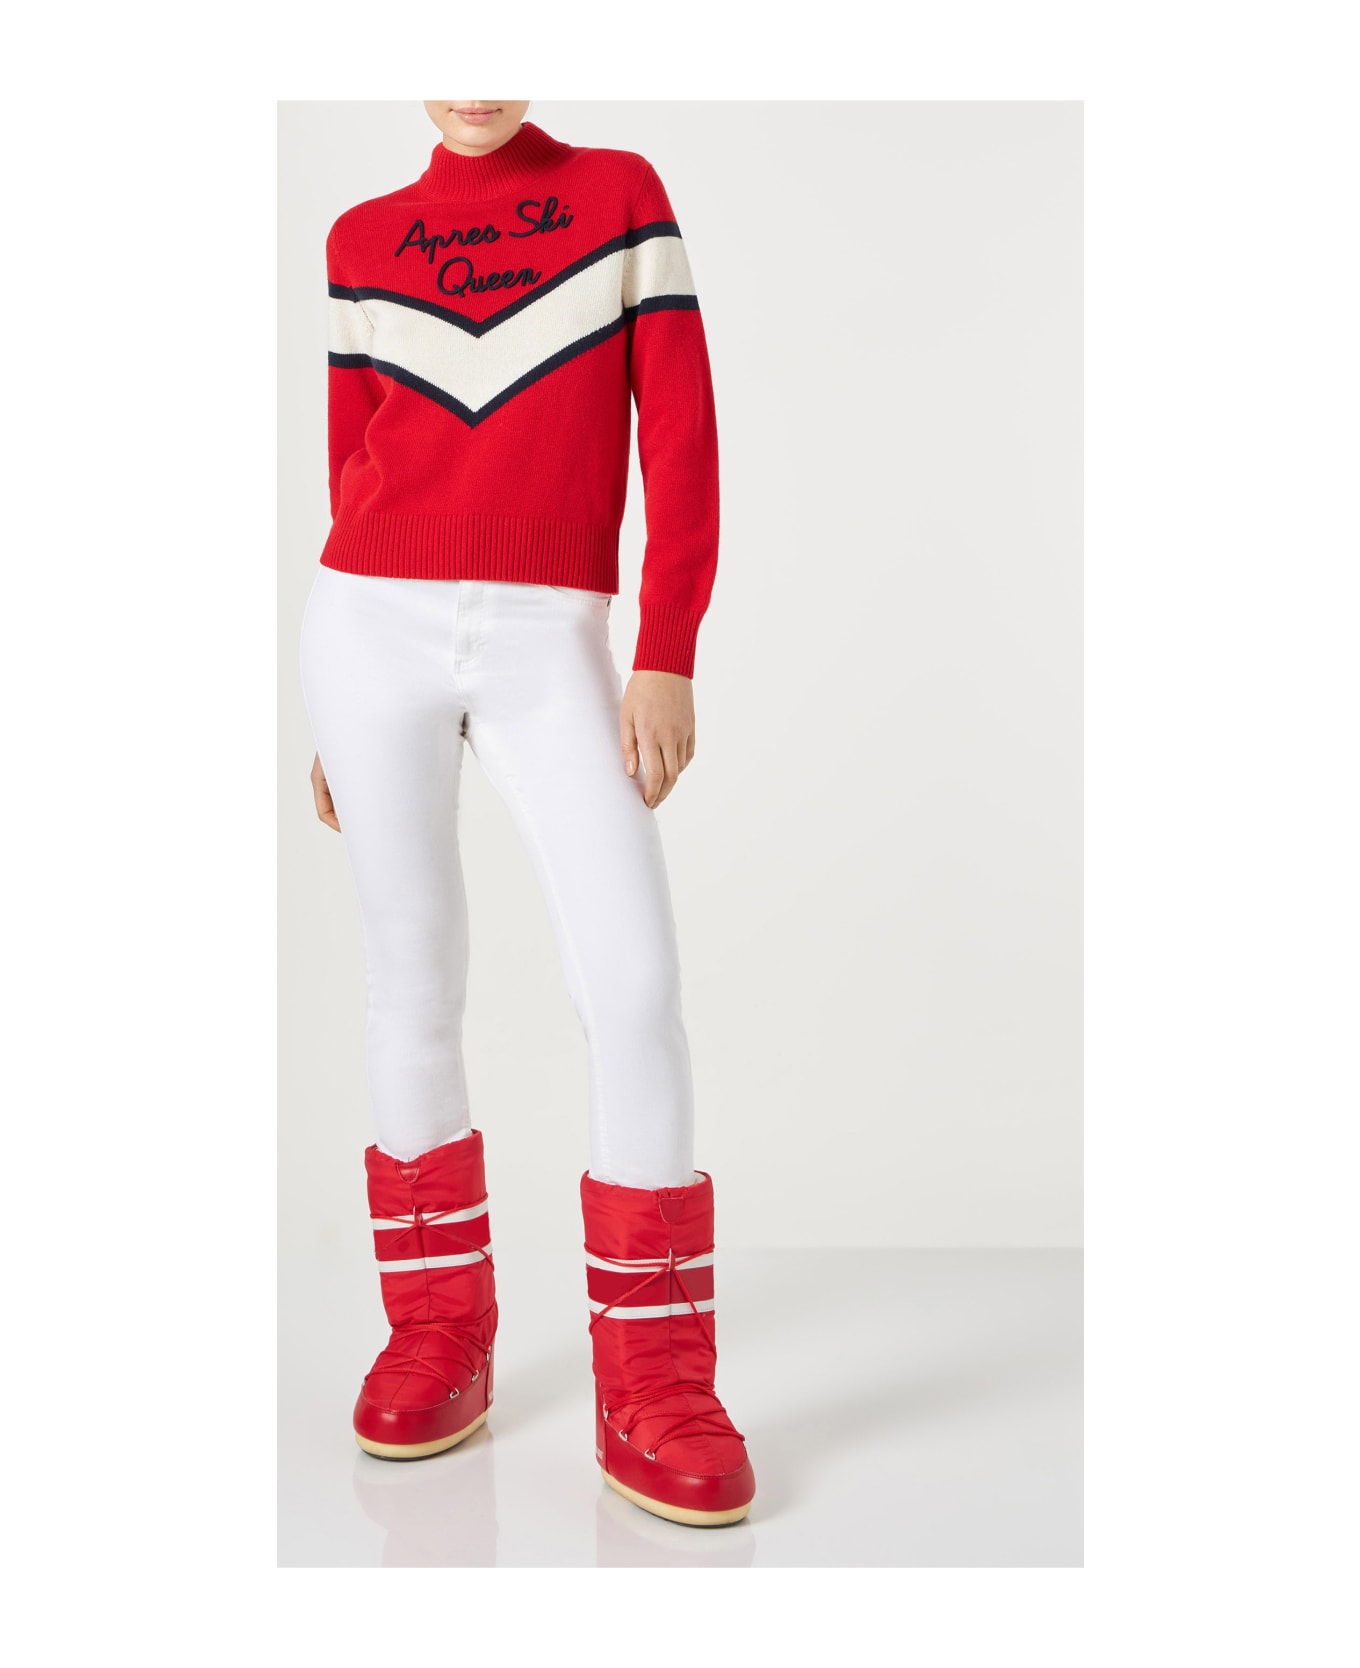 MC2 Saint Barth Woman Half-turtleneck Sweater With Apres Ski Queen Lettering - RED